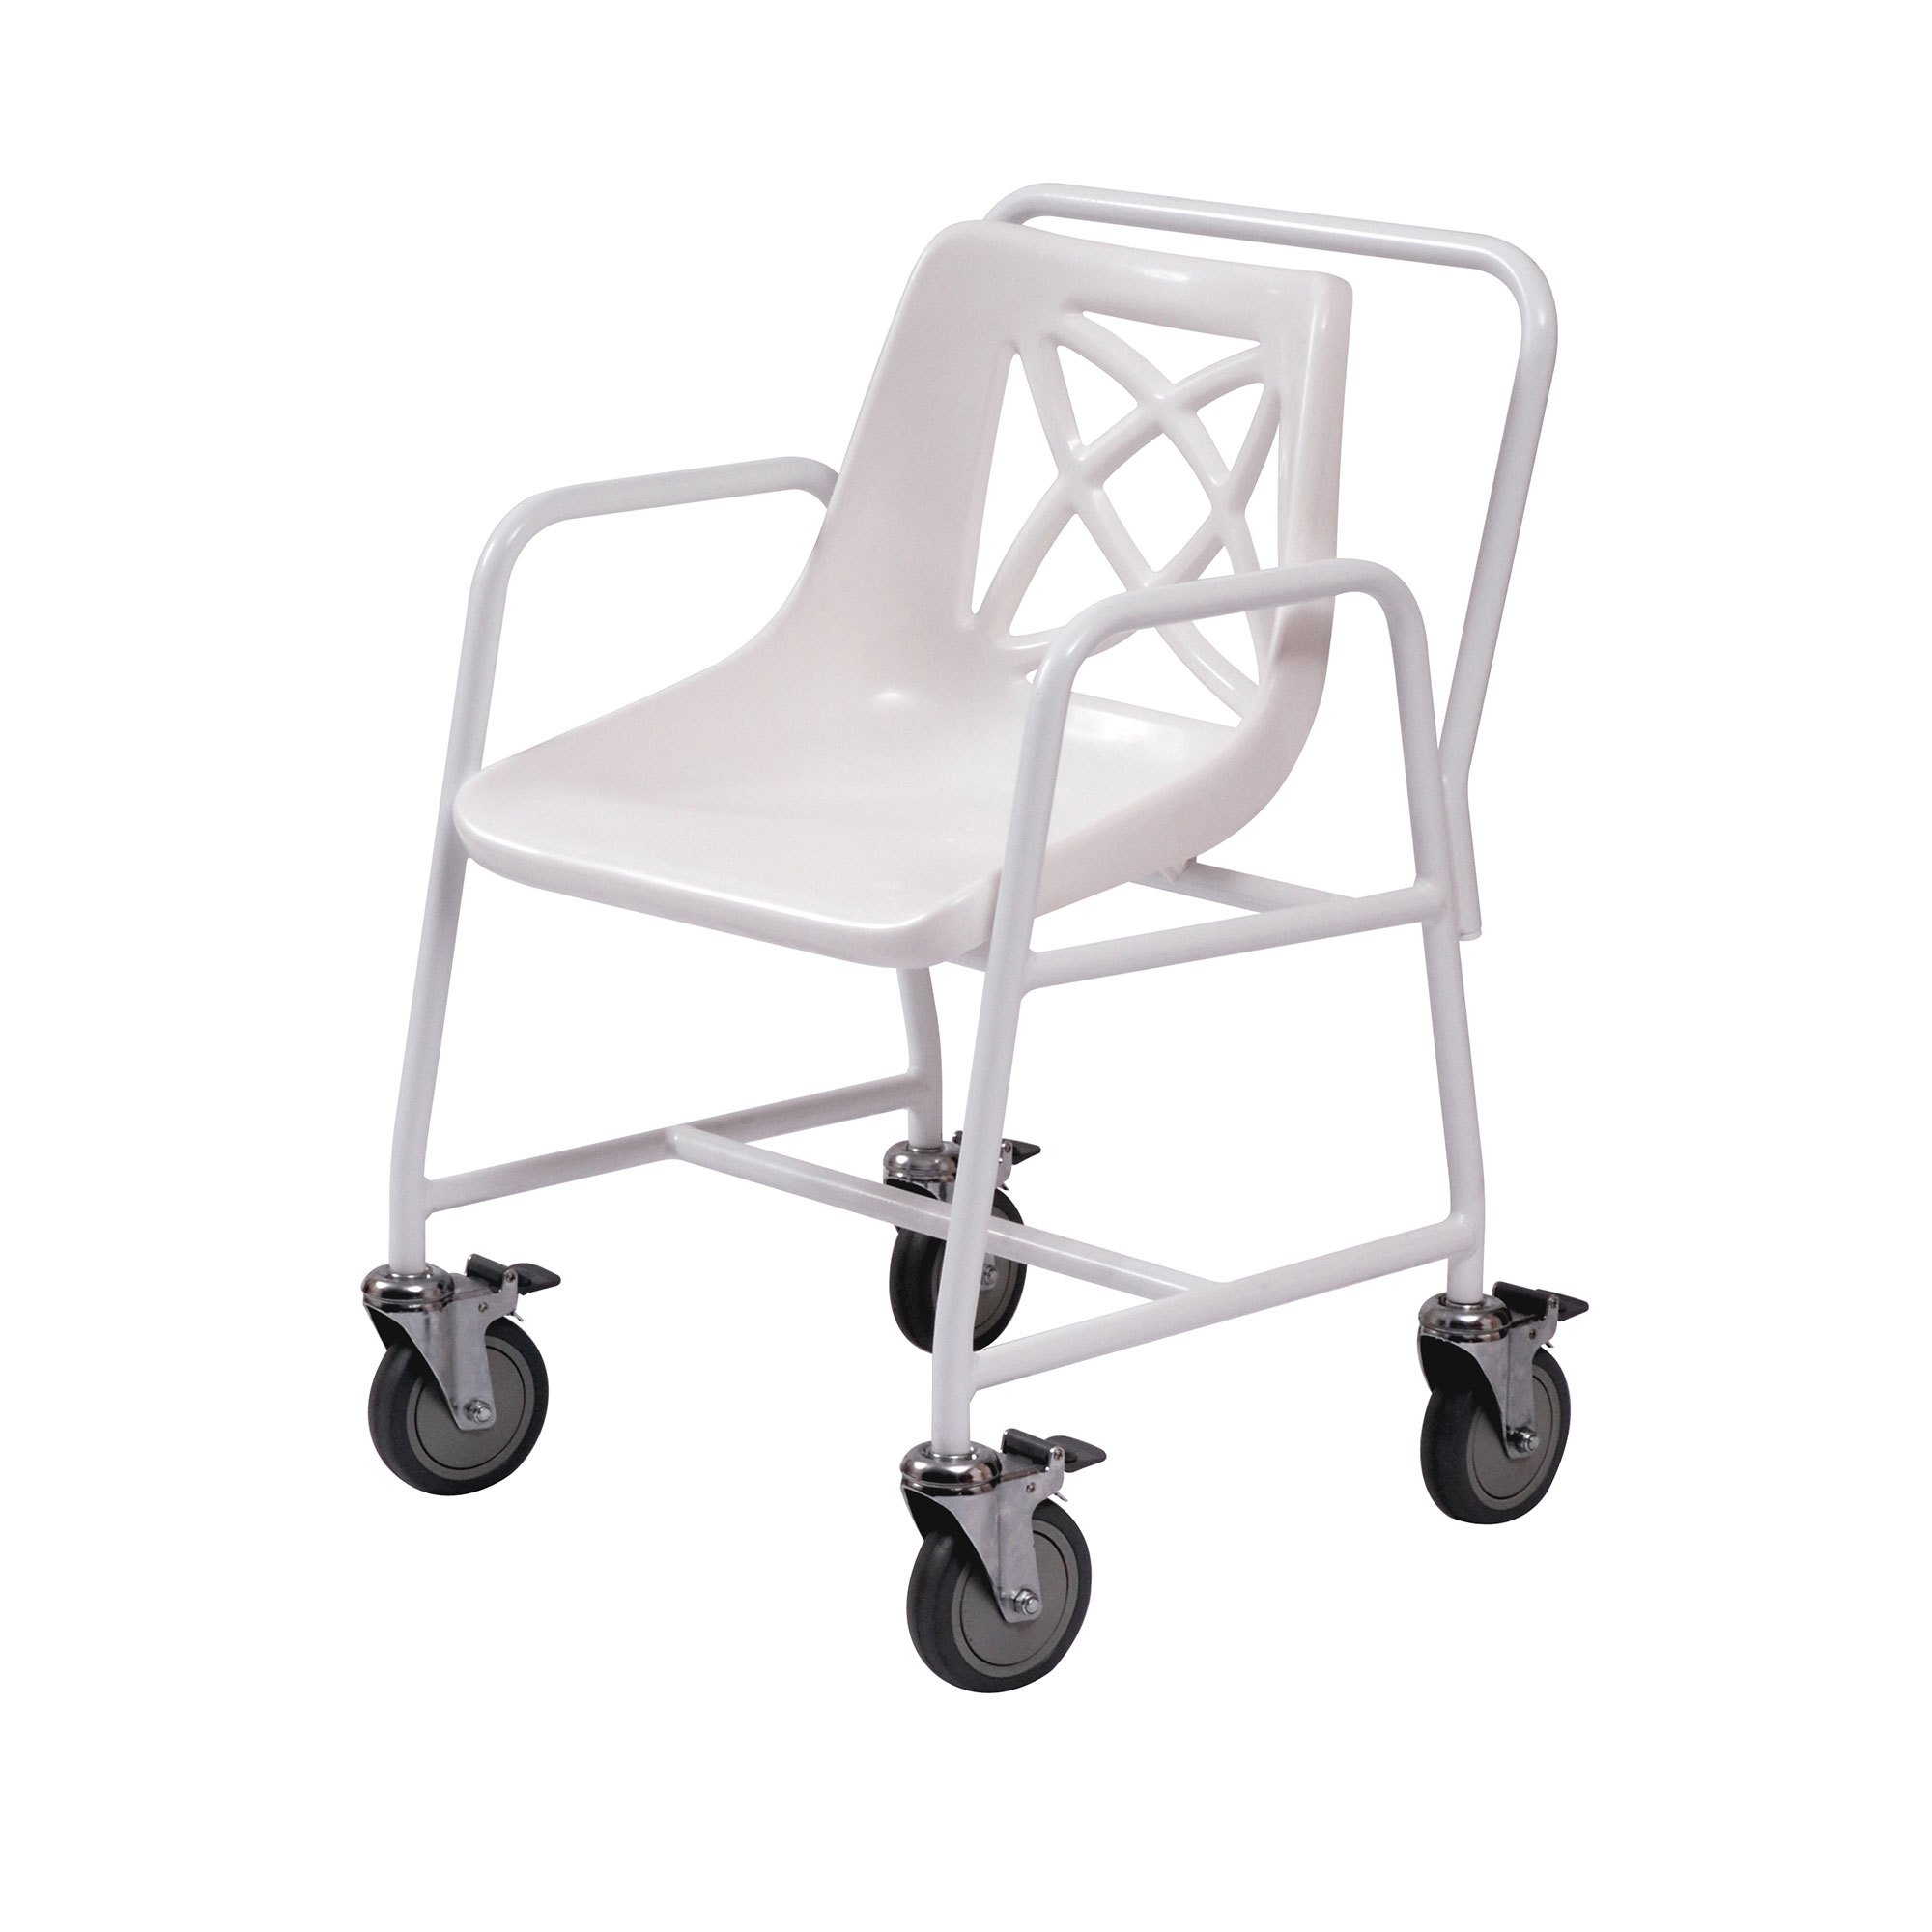 Mobile Shower Chair with 4 Brake Castors